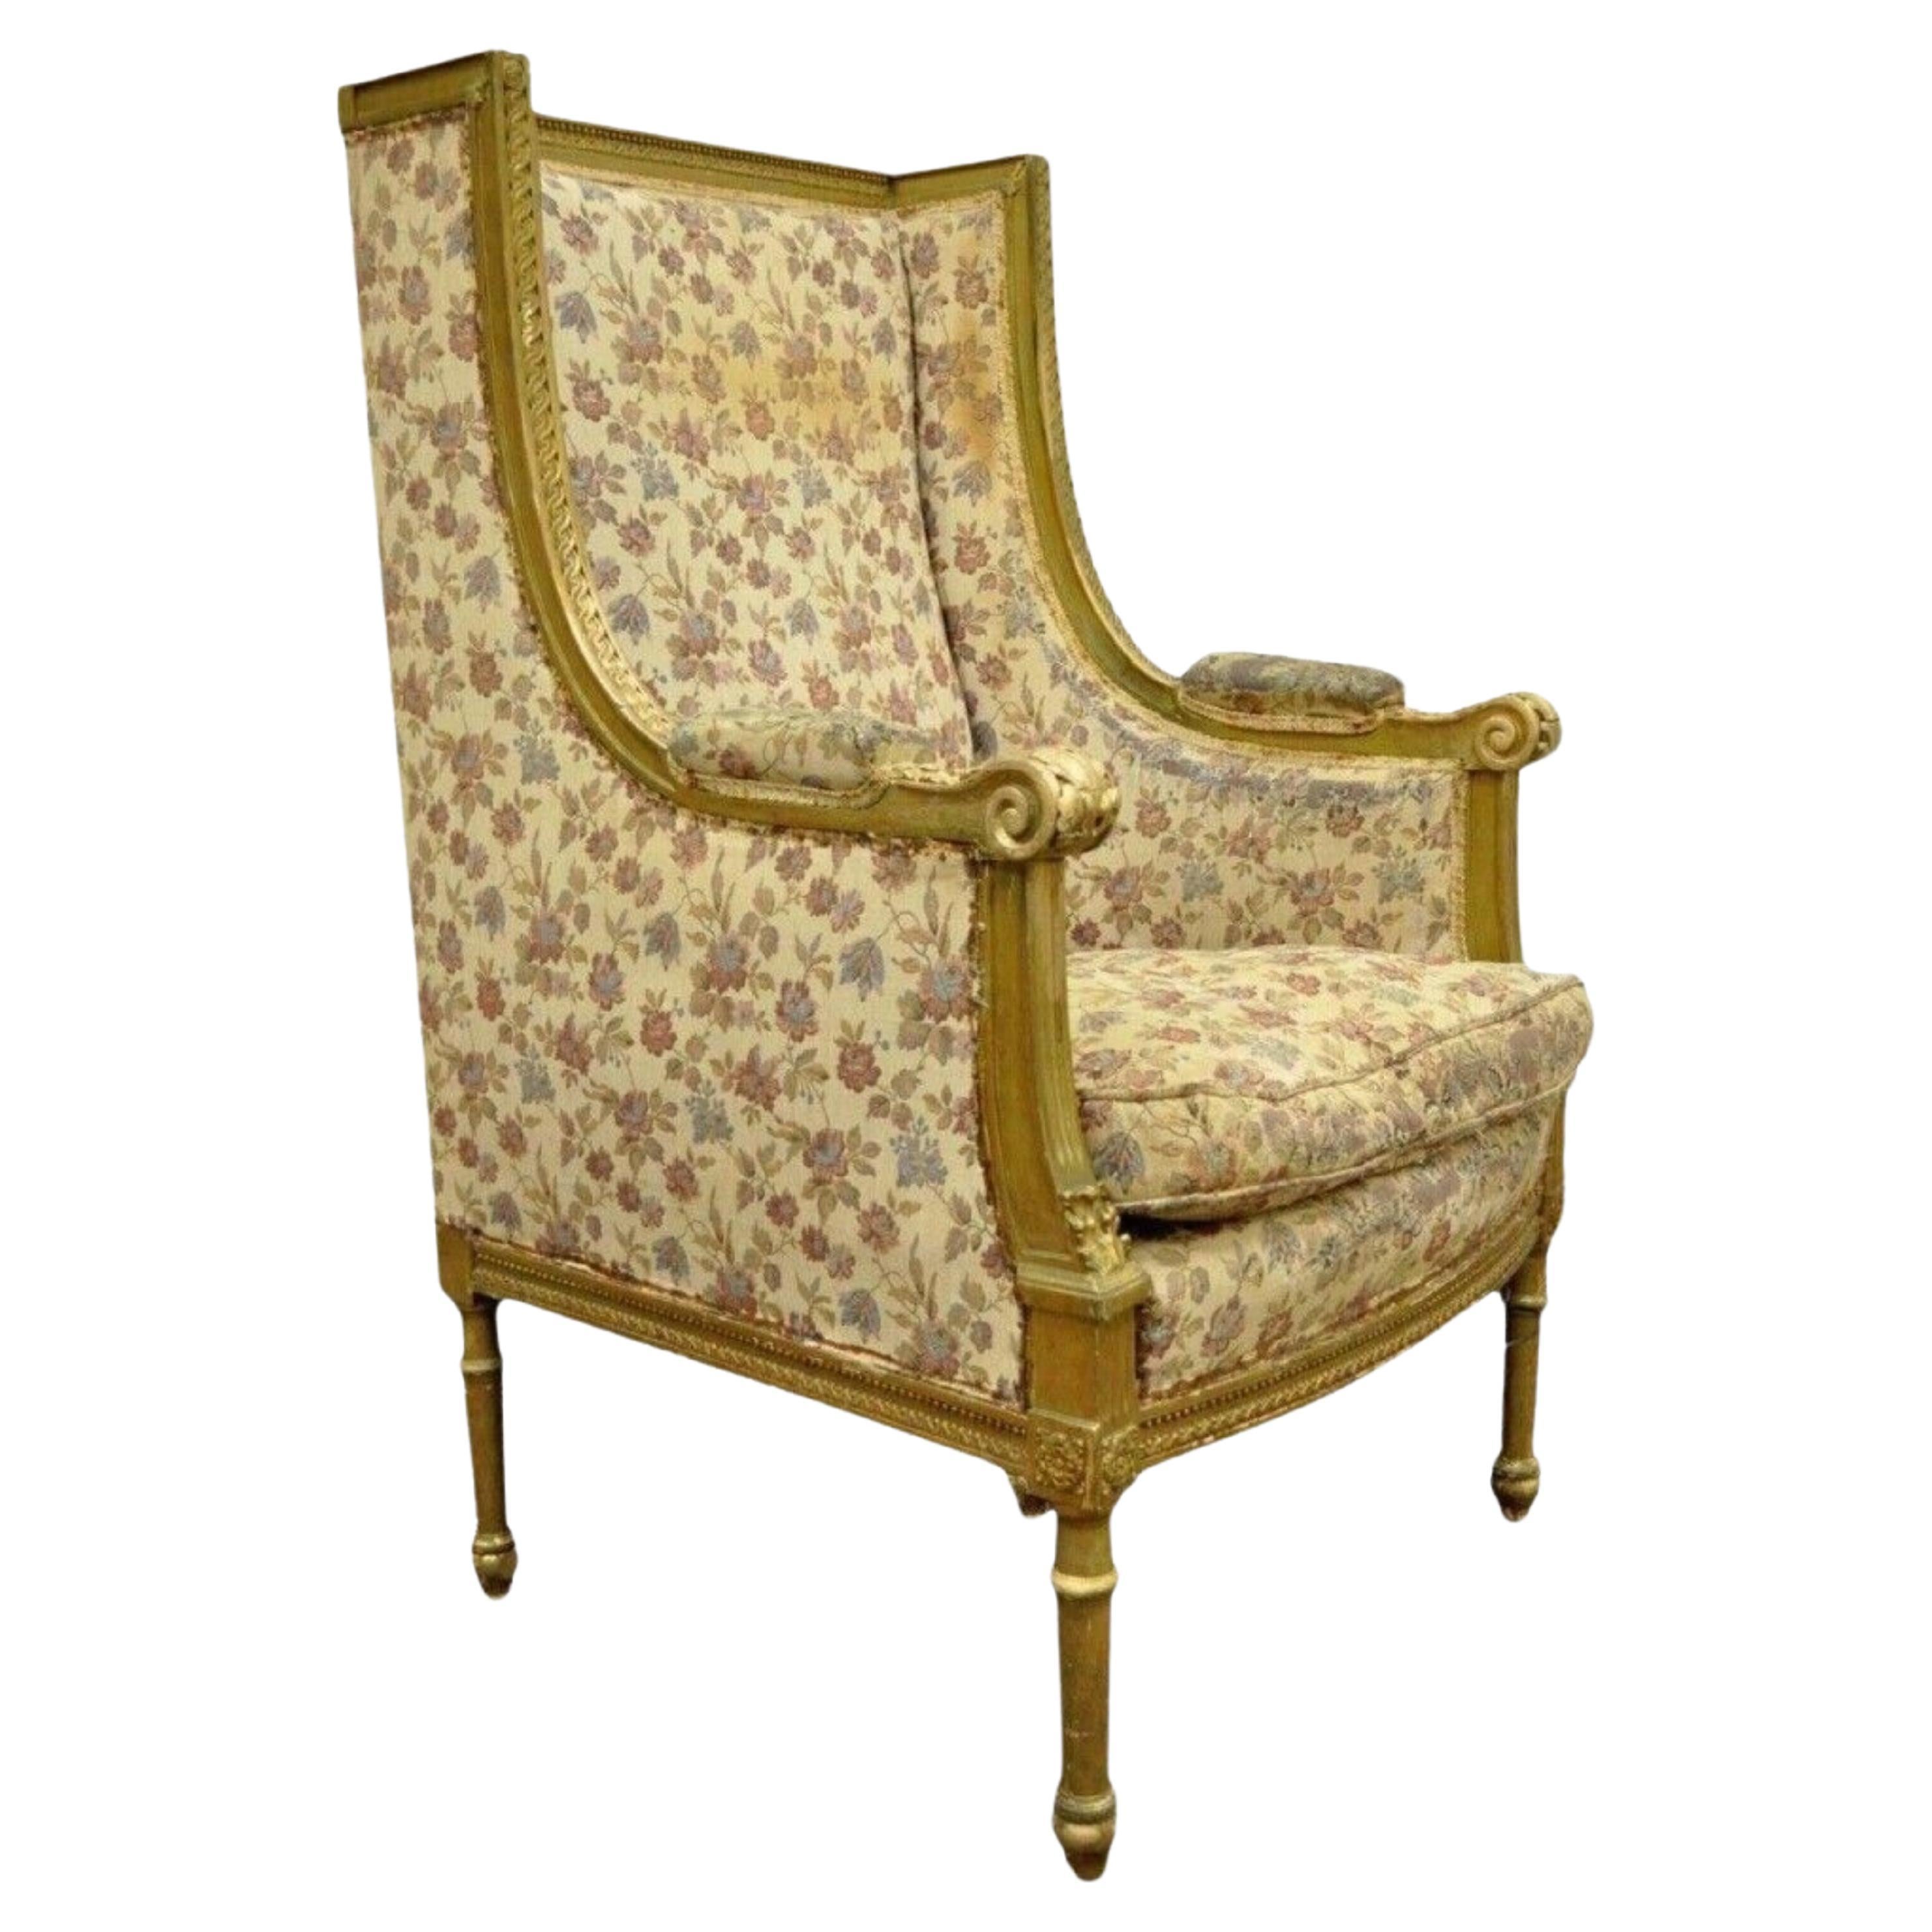 Antique French Louis XVI Victorian Gold Gilt Wood Wing Back Bergere Arm Chair For Sale